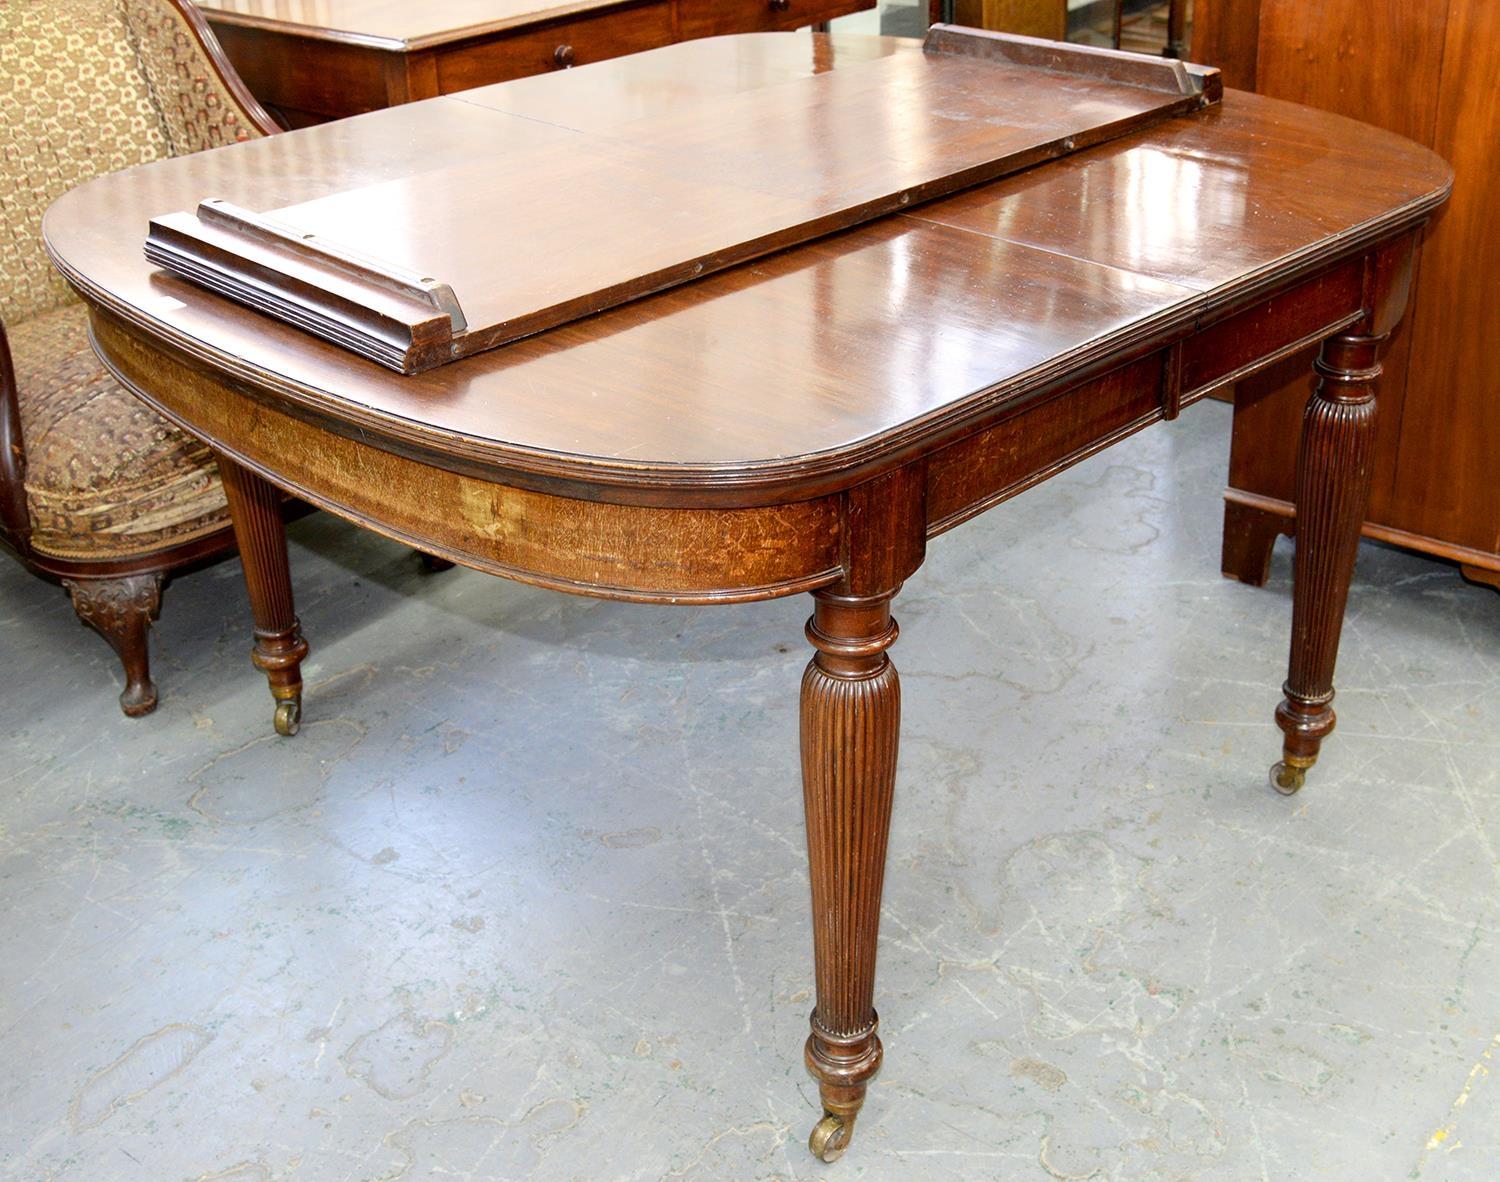 A VICTORIAN MAHOGANY DINING TABLE, C1890, THE TOP WITH D SHAPED ENDS ON FINELY REEDED INVERTED